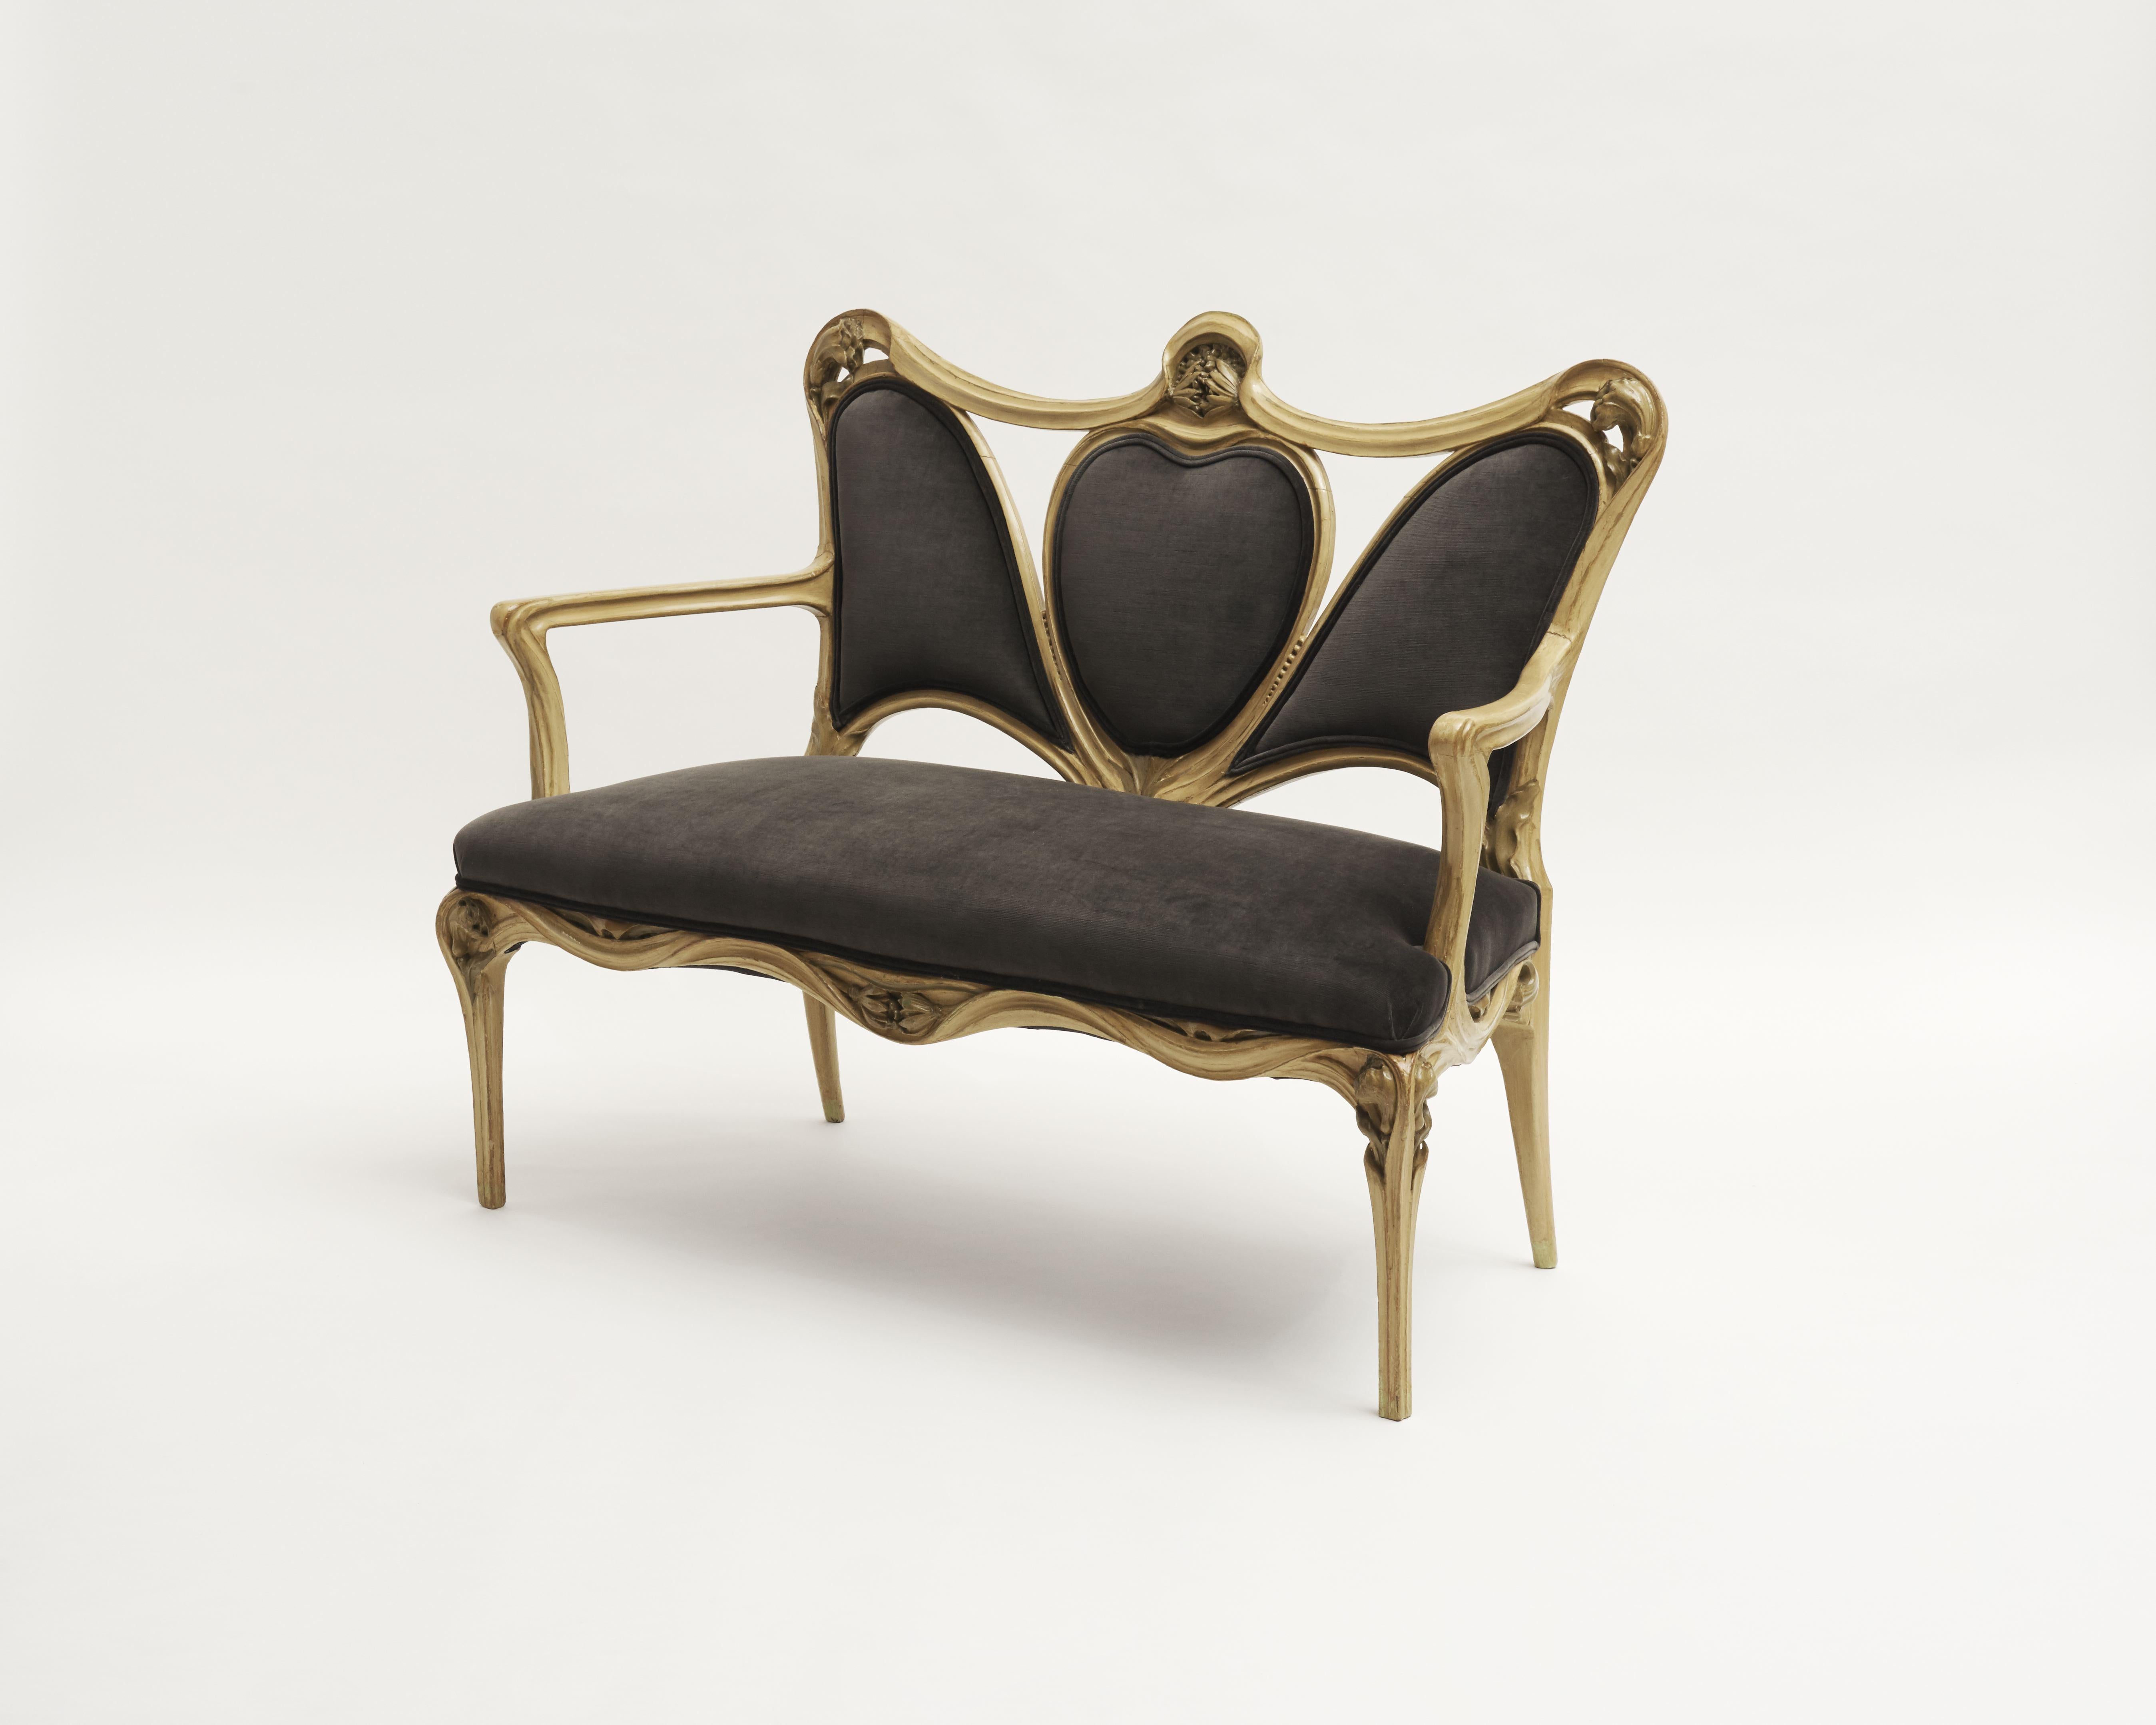 This settee is typical of De Feure’s style at the turn of the 20th century. The high back with swooping lines, paired with straight legs curving toward their meeting with the seat, is reminiscent of pieces De Feure created for the, 1900 Paris